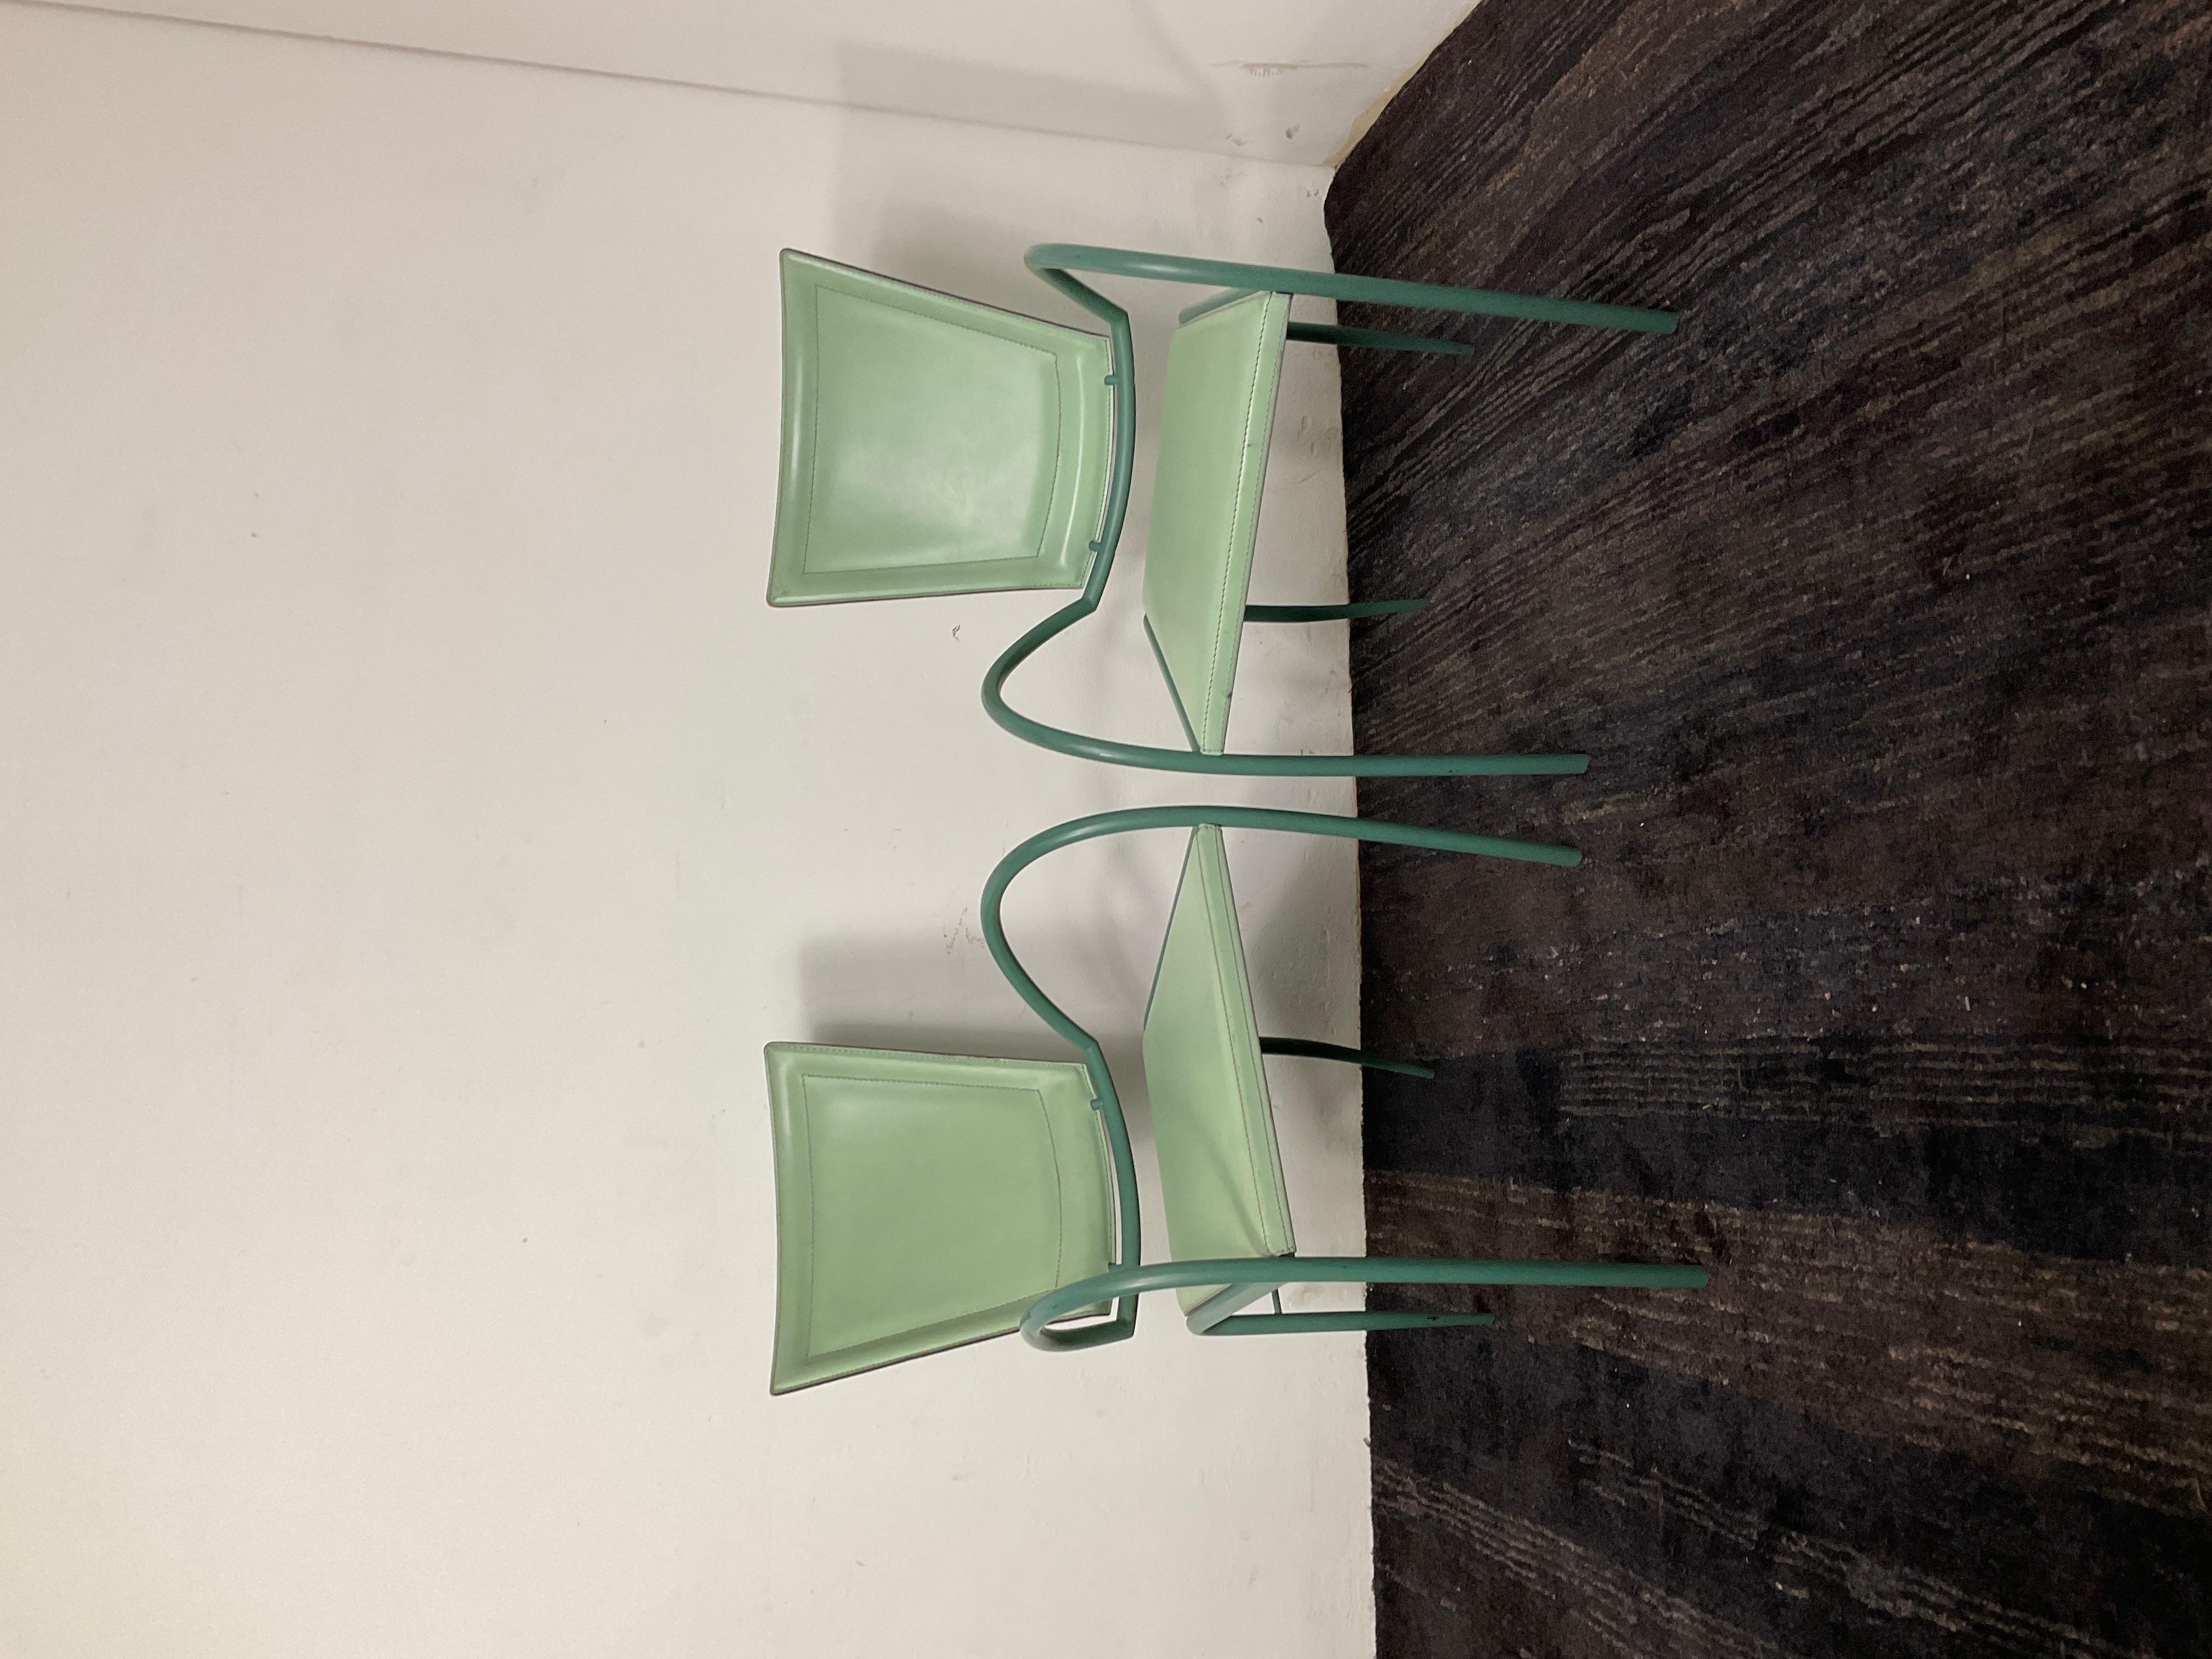 Late 20th Century Italian Iron and Leather Chairs by Sawaya & Moroni - a Pair